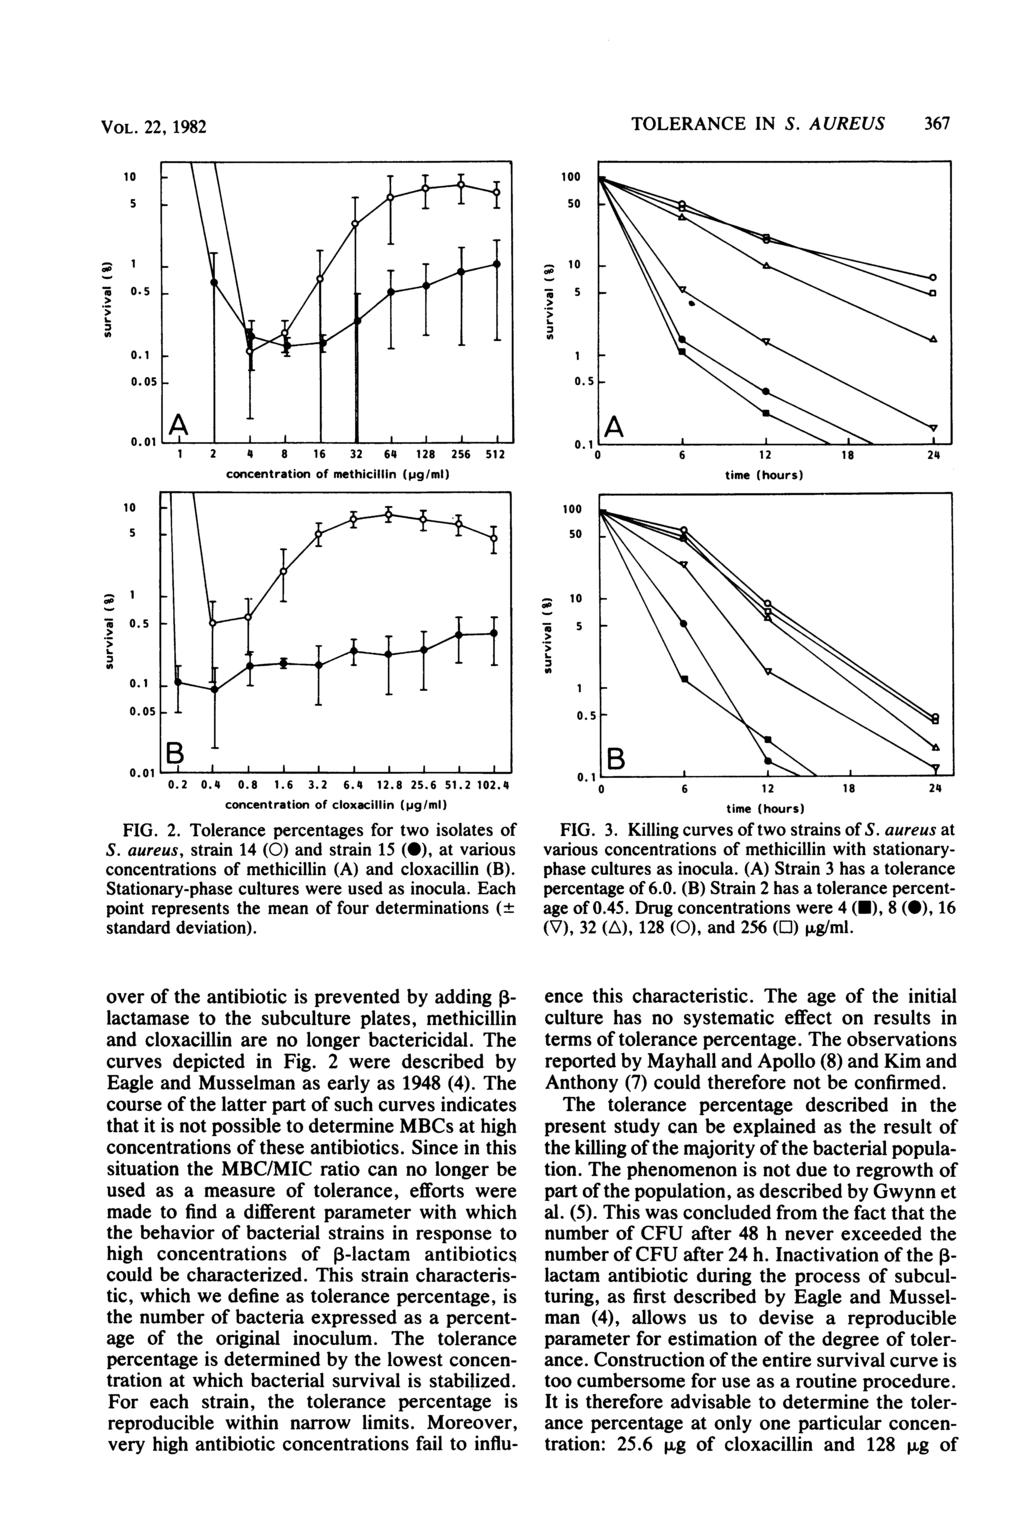 VOL. 22, 1982 TOLERANCE IN S. AUREUS 367,0. 0.1 0.0 -Z 0. 0. 1 0.0 1 2 4 8 16 32 64 128 26 12 0.01 0.2 0.4 0.8 1.6 3.2 6.4 12.8 2.6 1.2 2.4 concentration of cloxacillin (pg/mi) FIG. 2. Tolerance percentages for two isolates of S.